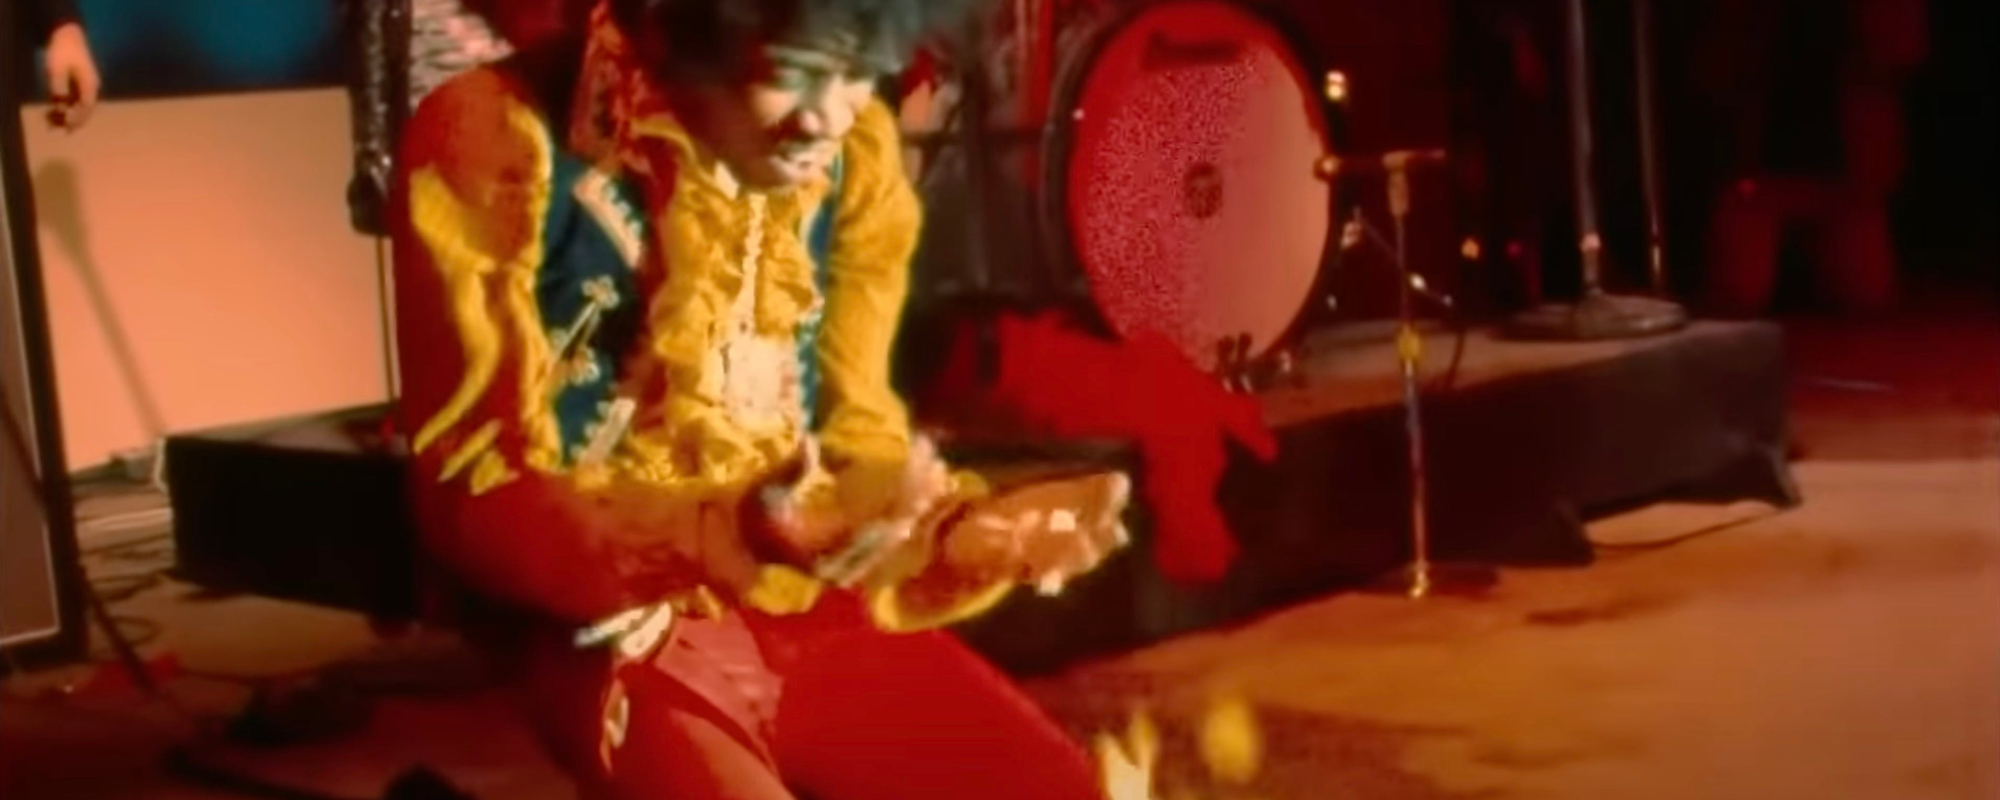 Remember When: Jimi Hendrix Humps, Burns, Smashes, and Gifts His Hand-Painted Guitar to a Stunned Monterey Crowd—All to Outdo The Who